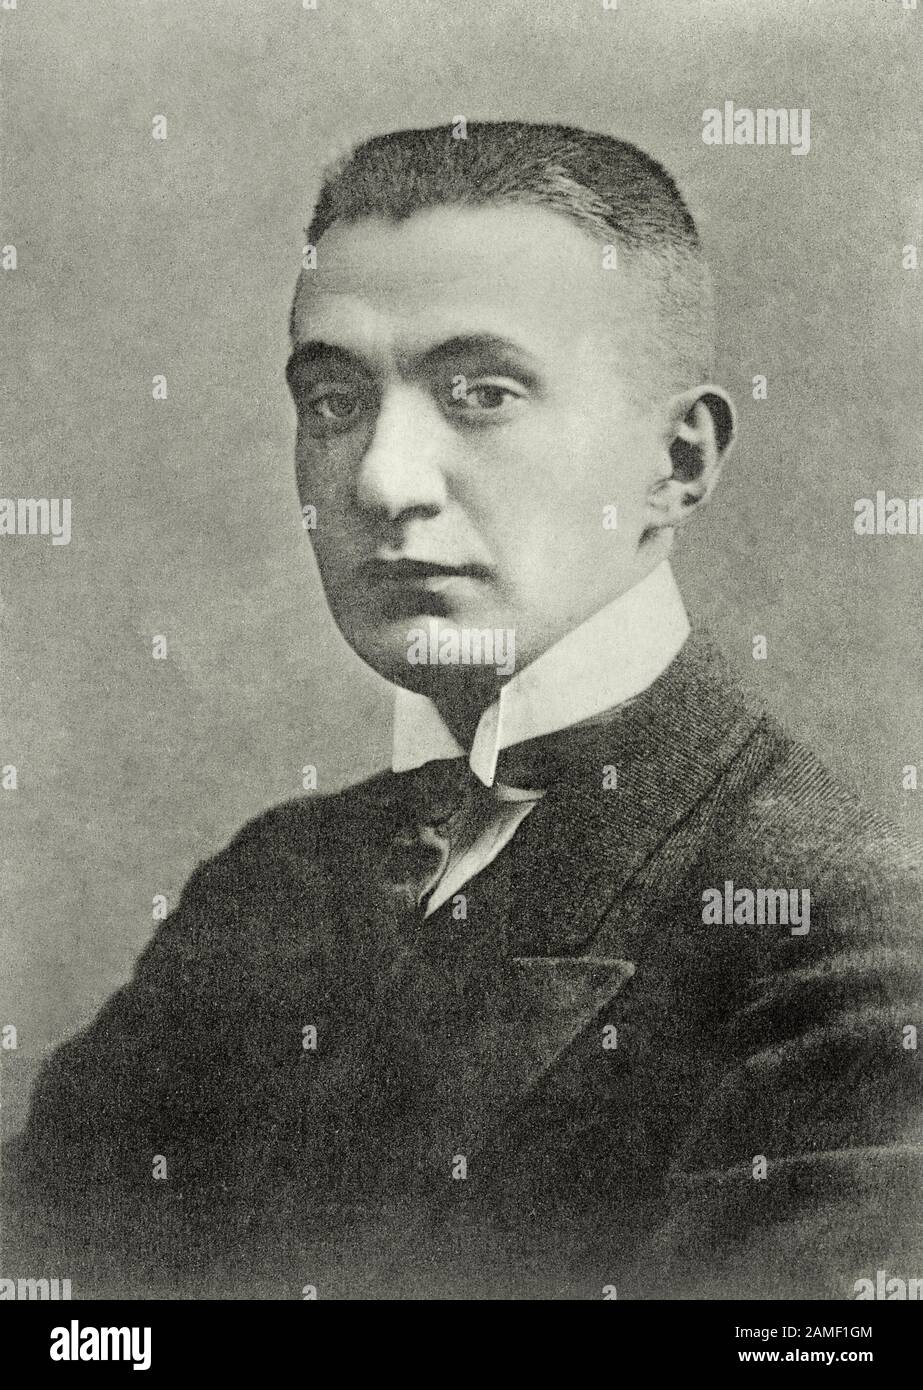 Alexander Fyodorovich Kerensky (1881 – 1970) was a Russian lawyer and revolutionist who was a key political figure in the Russian Revolution of 1917. Stock Photo